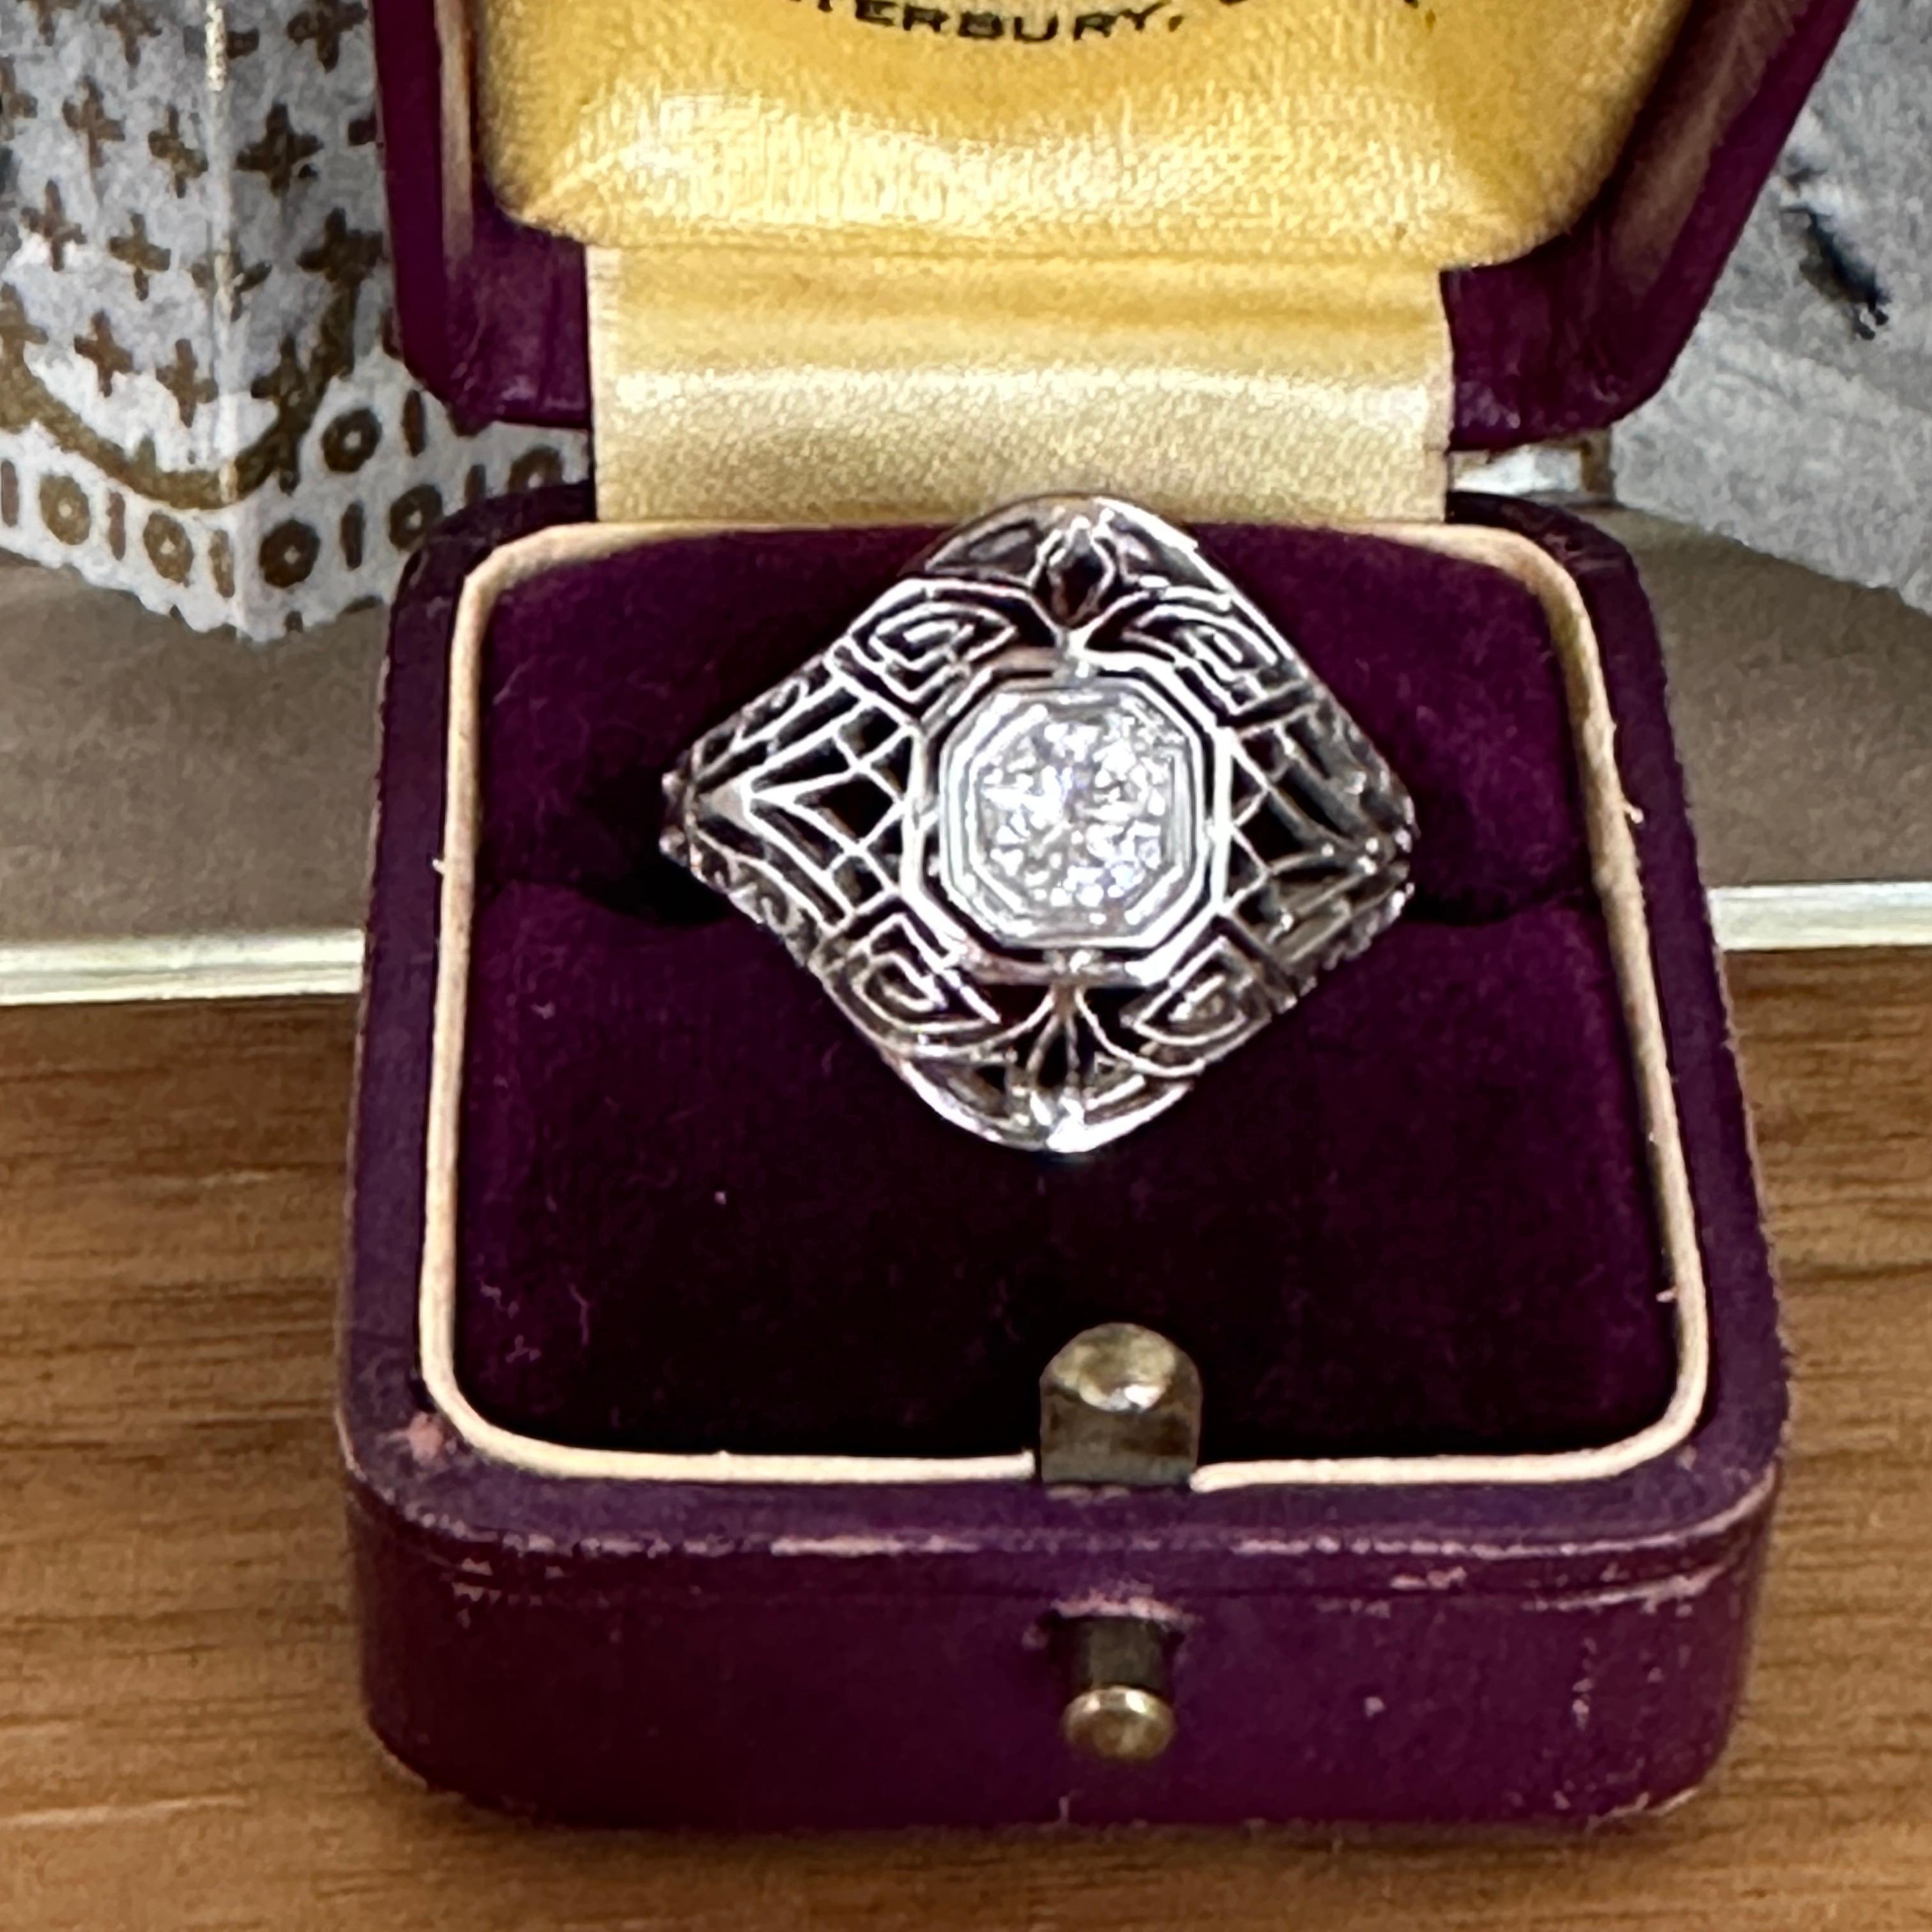 Details:
Fabulous Art Deco diamond filligree ring set in 14K white gold. A bold ring, with lots of character. Single diamond measuring 4.2mm. This is a sweet ring—you will not be disappointed! Please ask all necessary questions prior to placing an